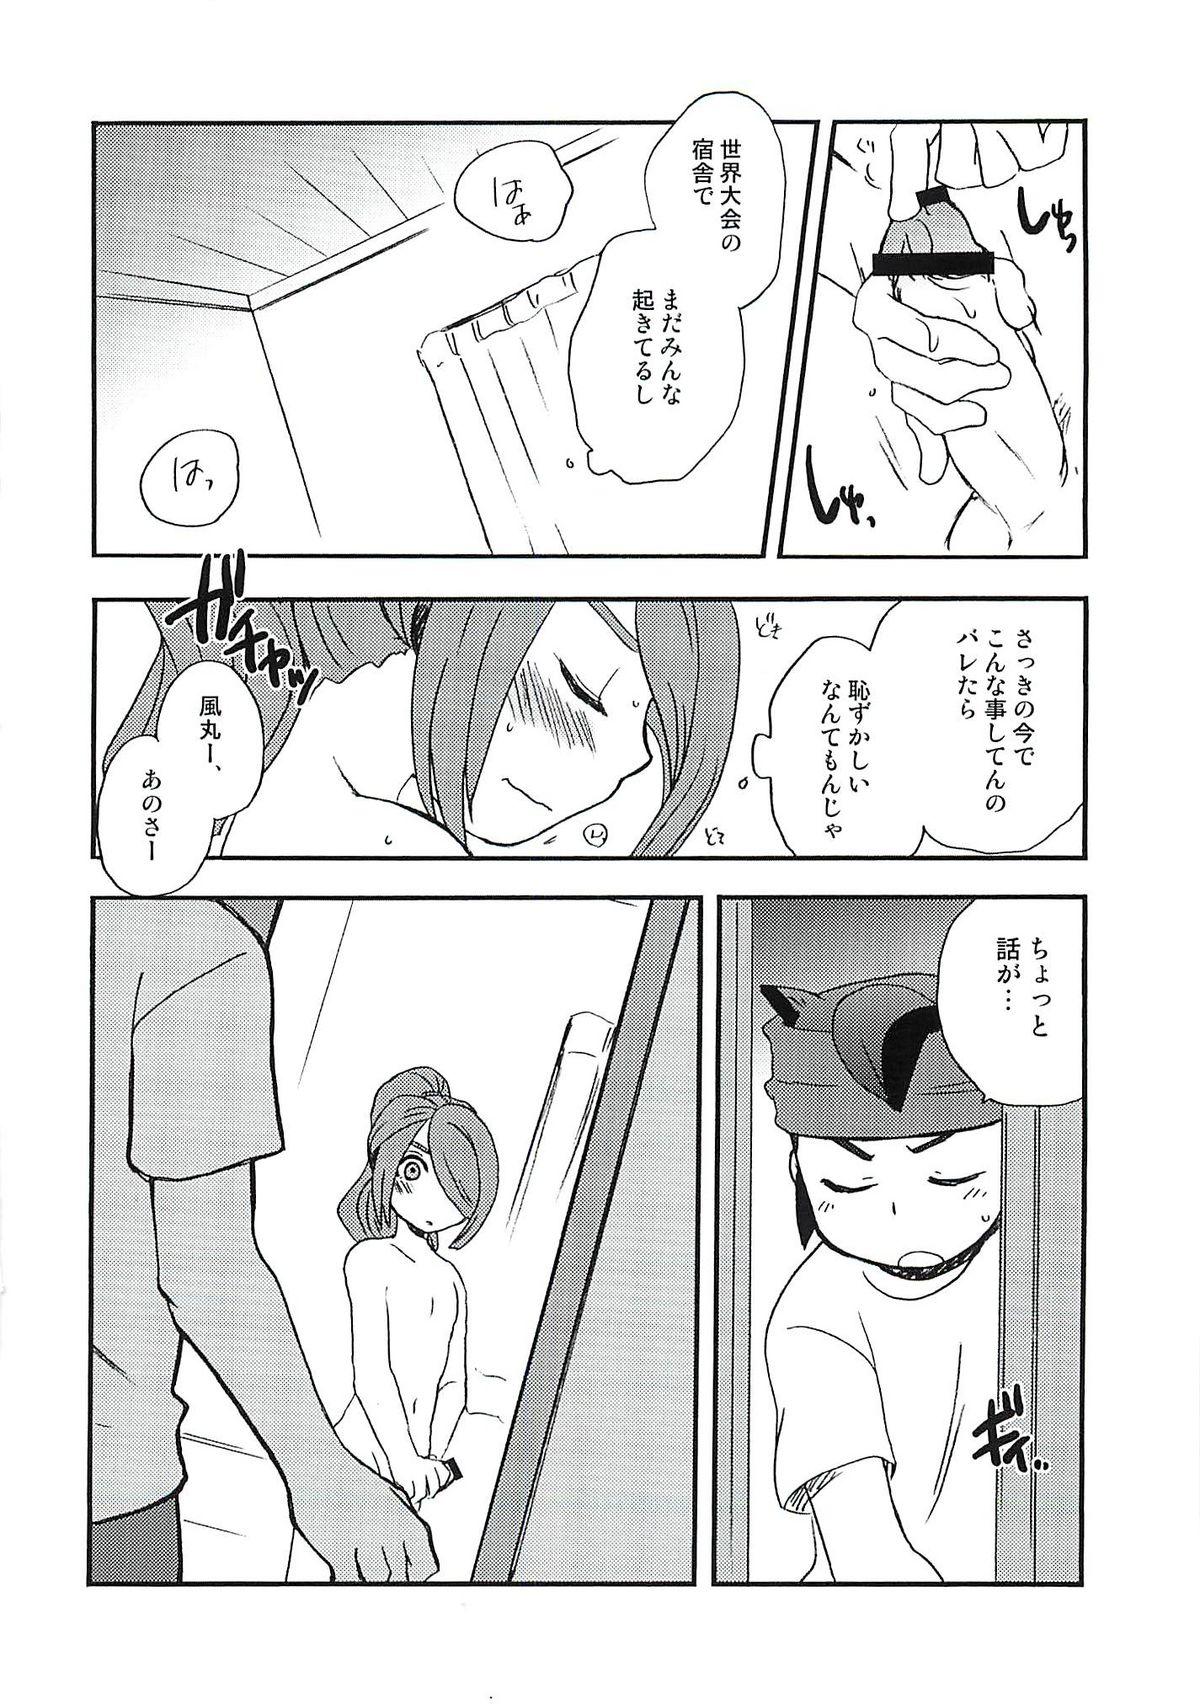 Cousin 07/21 - Inazuma eleven Gaping - Page 11